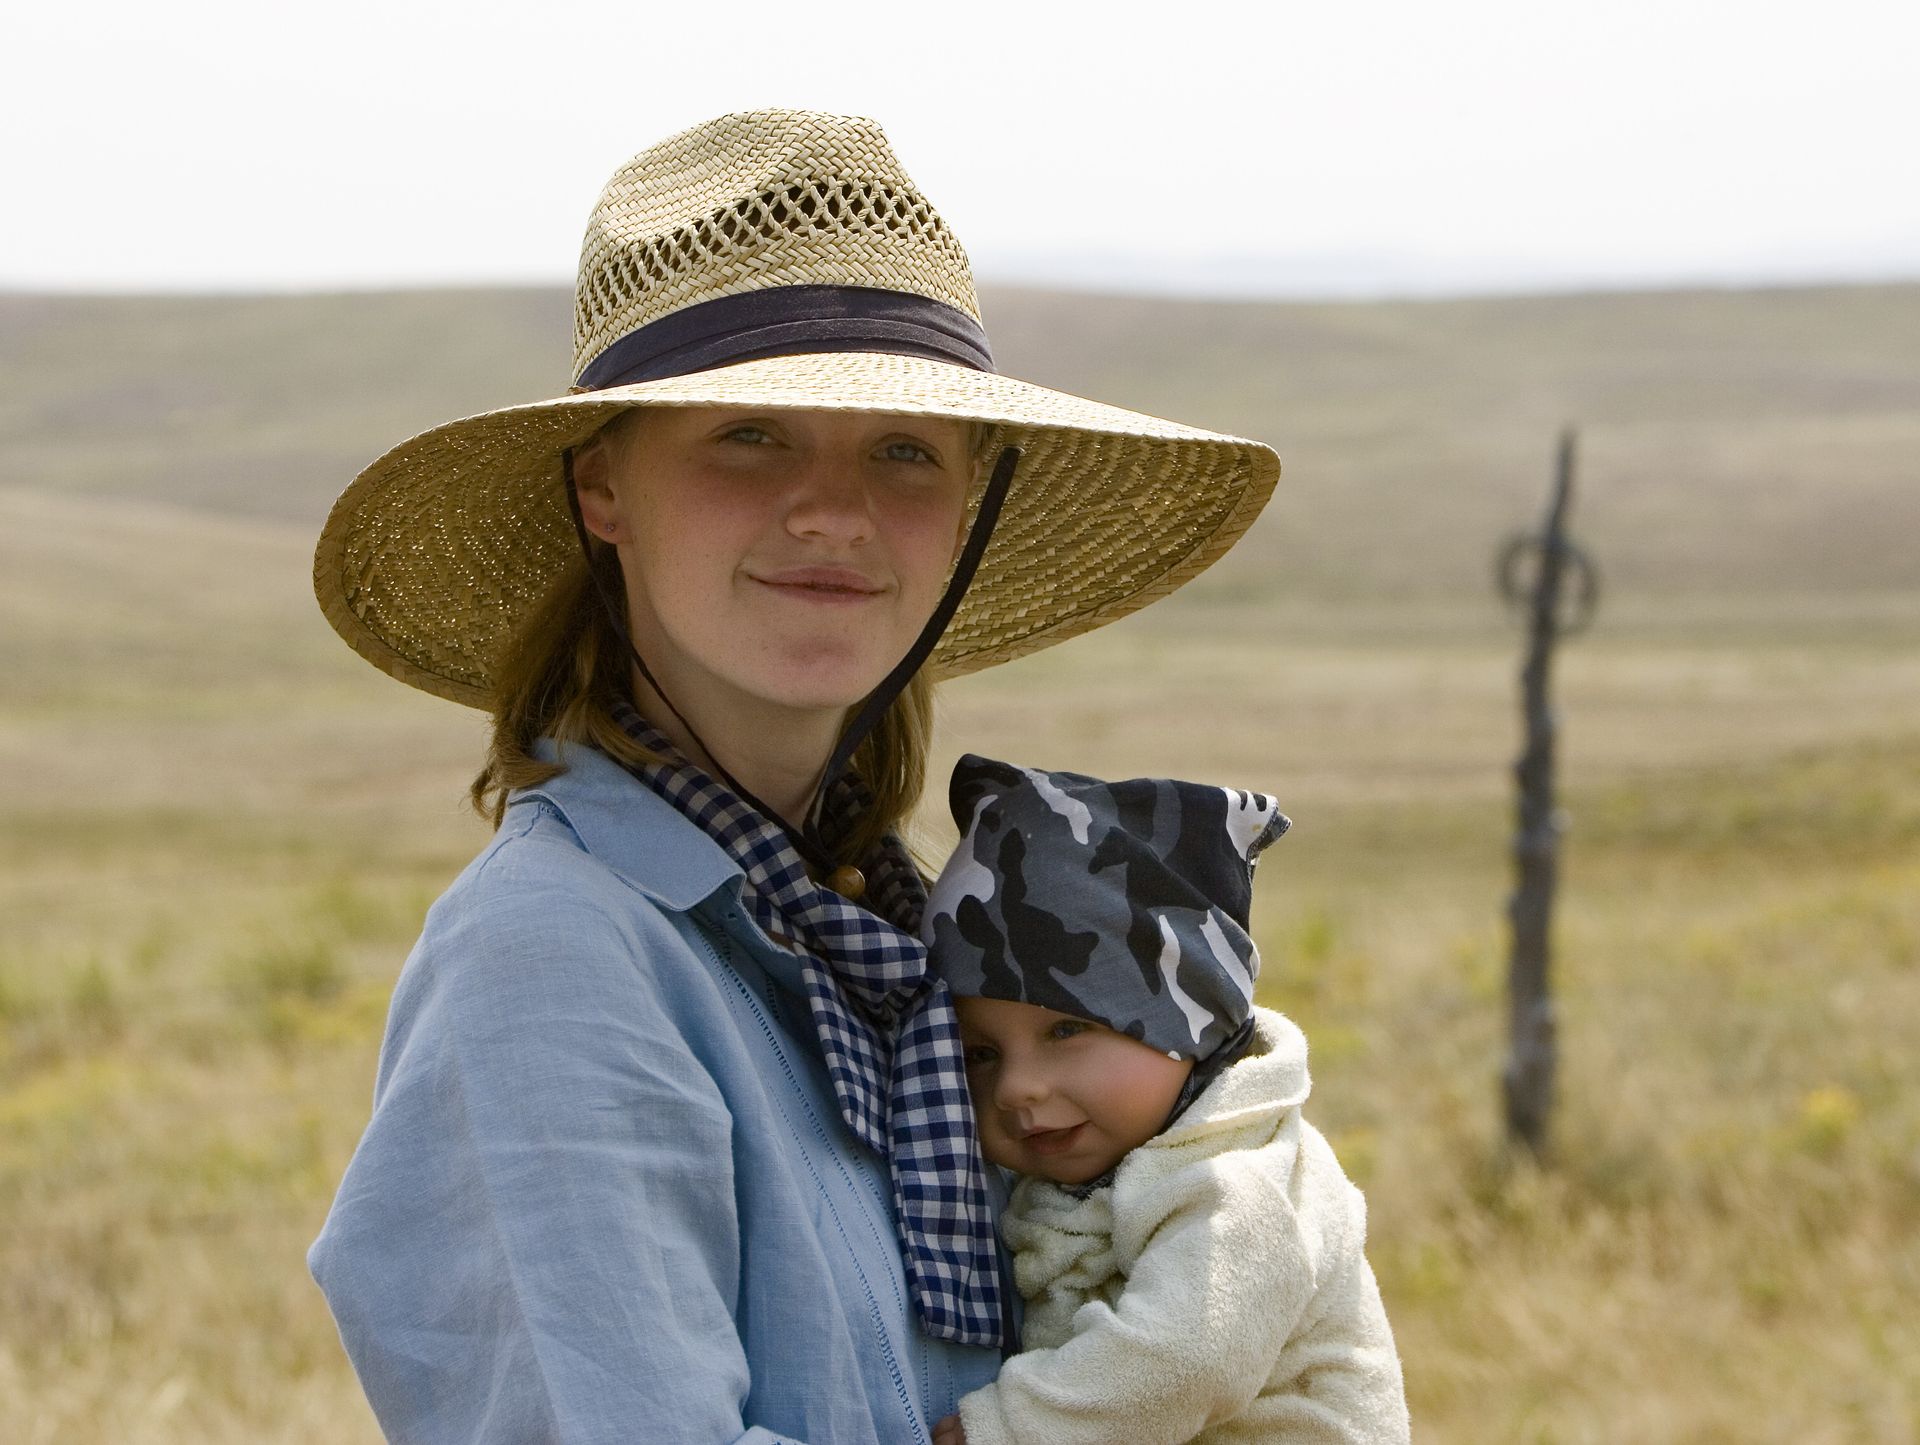 A young woman in a wide-brimmed straw hat holds a little baby and smiles.